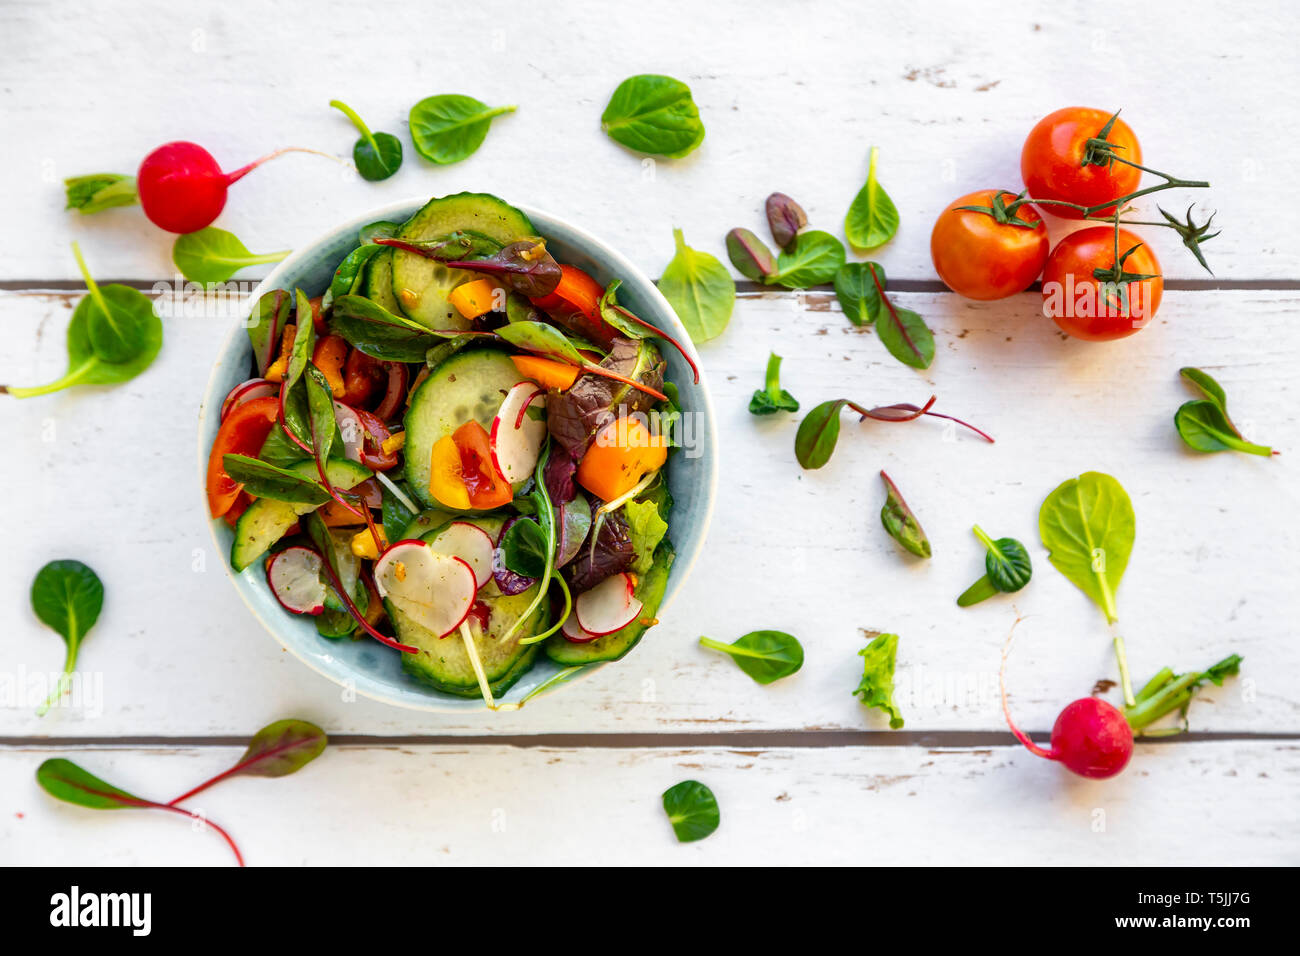 Salad with cucumber, tomato, red radish and bell pepper Stock Photo